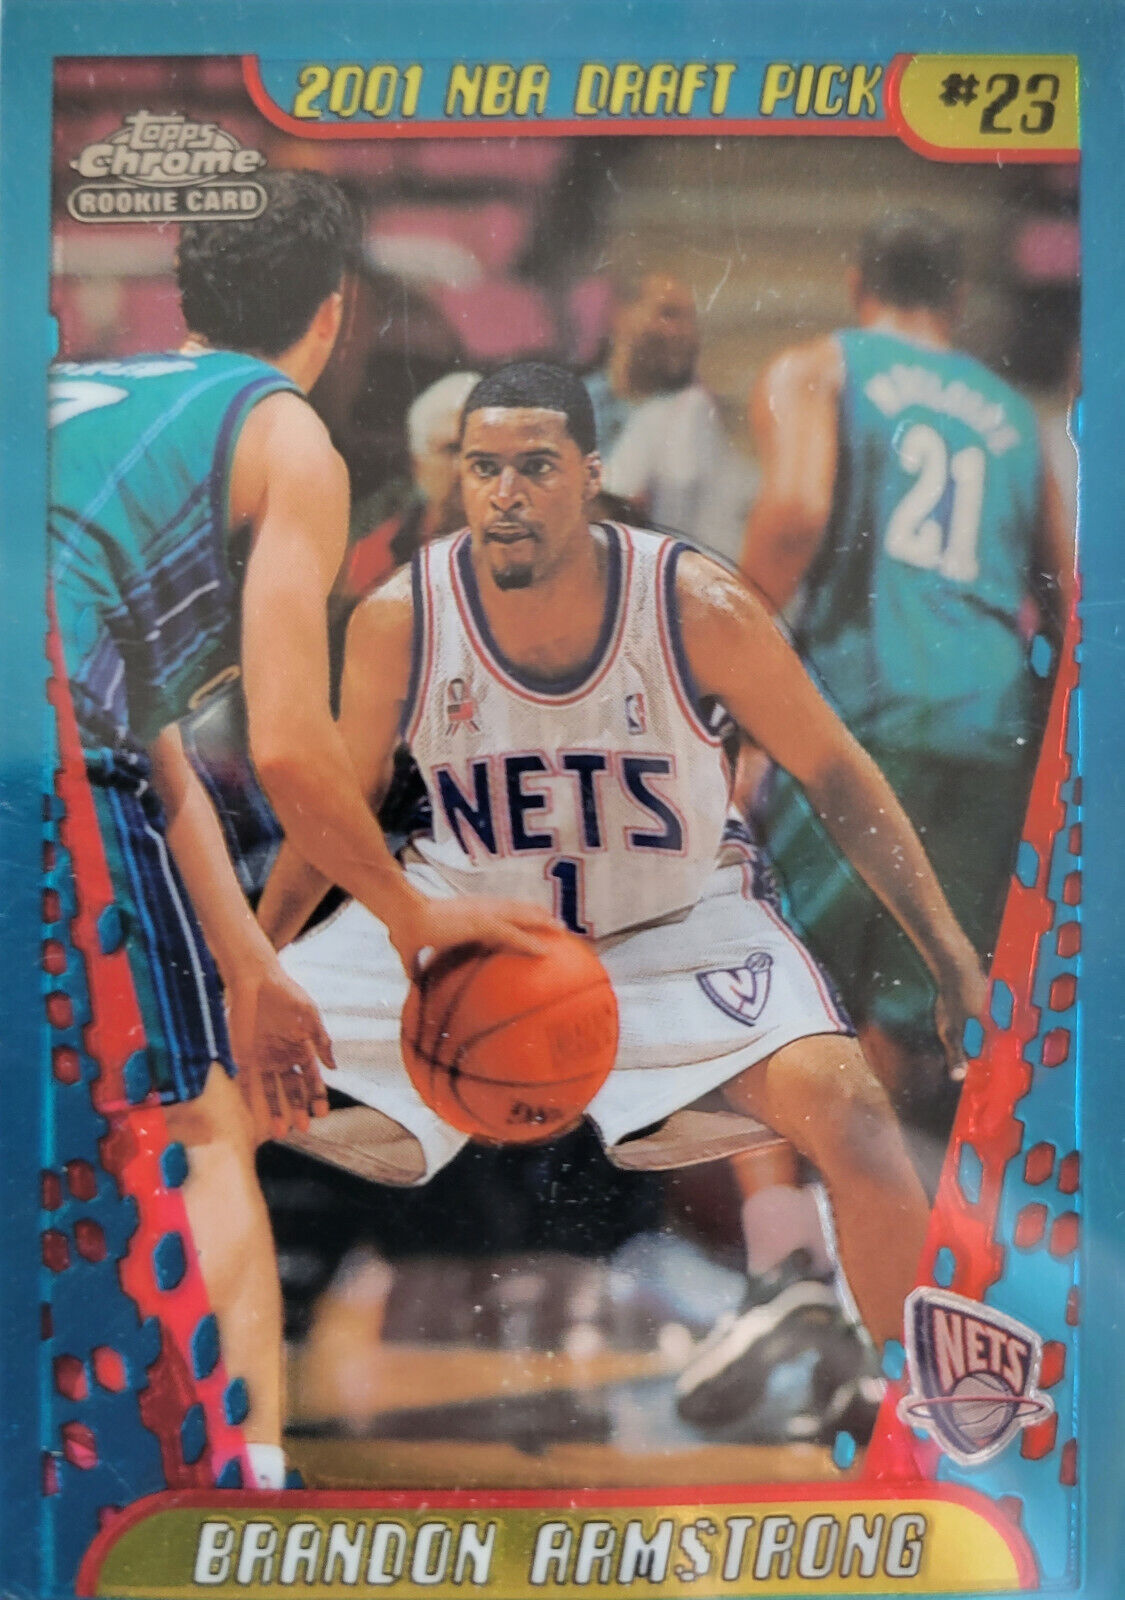 1-2001/02 TOPPS CHROME ROOKIE REFRACTOR BRANDON ARMSTRONG NETS CARD#151. rookie card picture